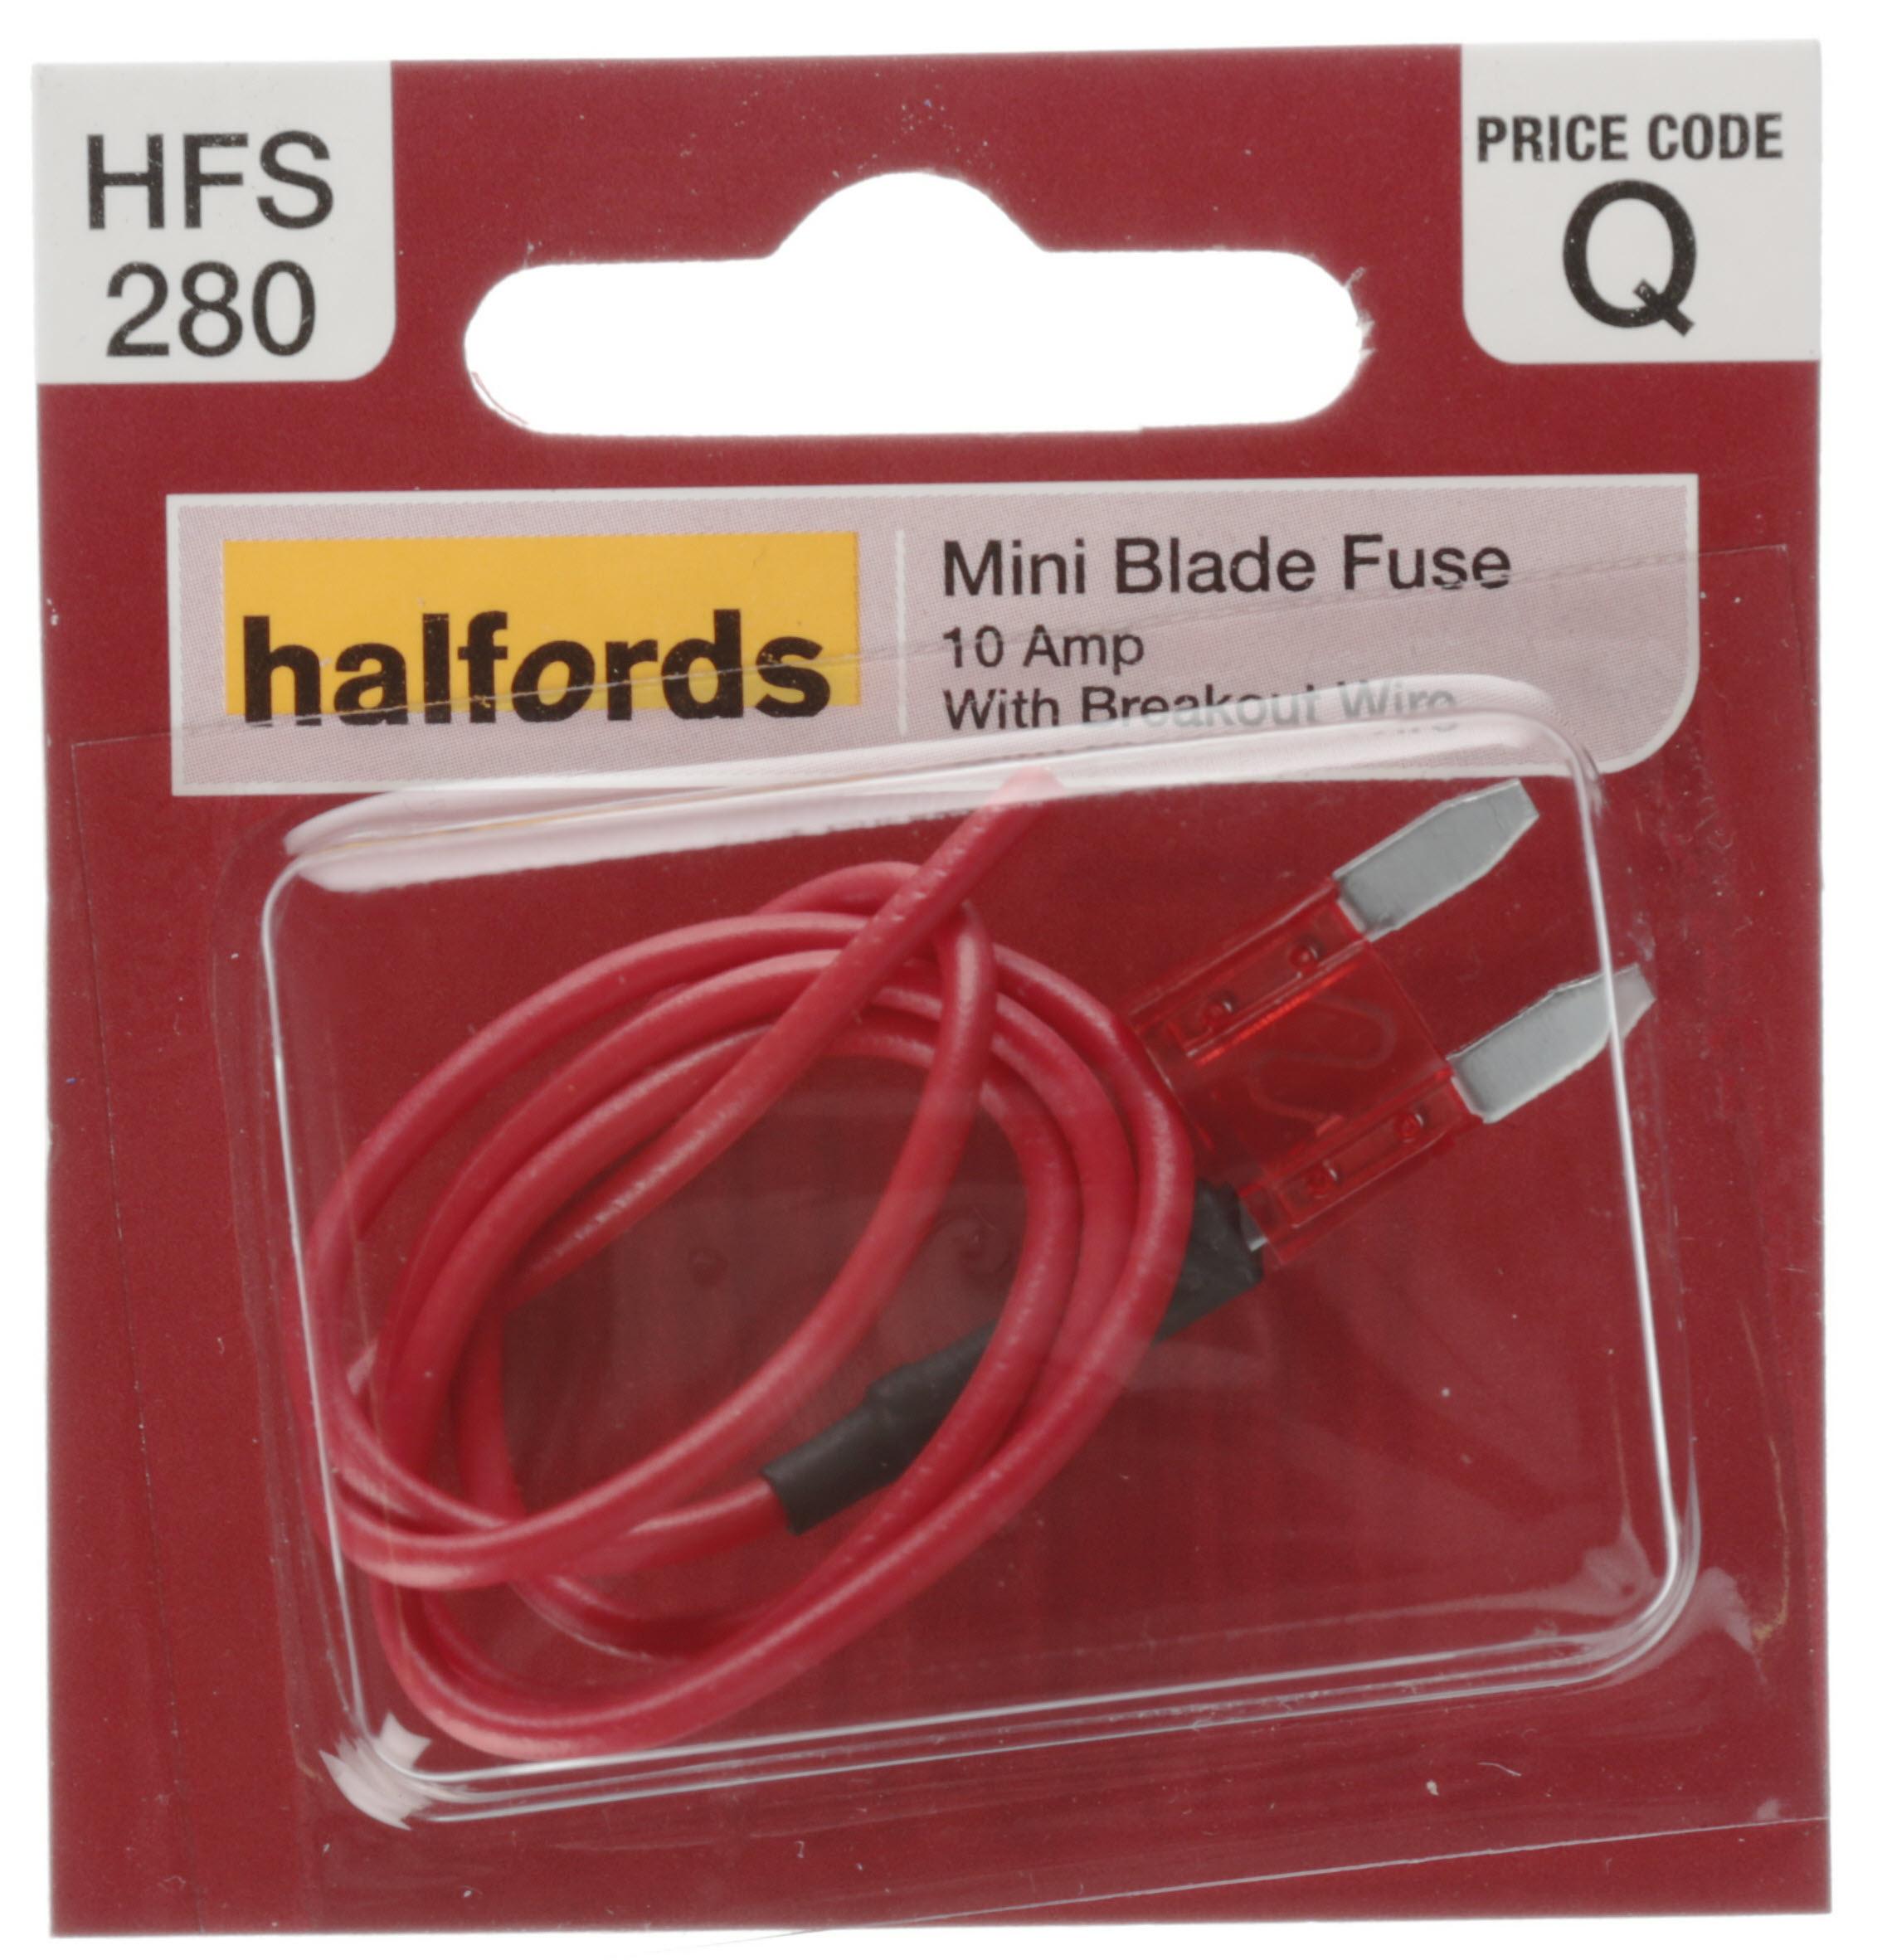 Halfords Mini Blade Fuse + Breakout Wire 10 Amp (Hfs280)